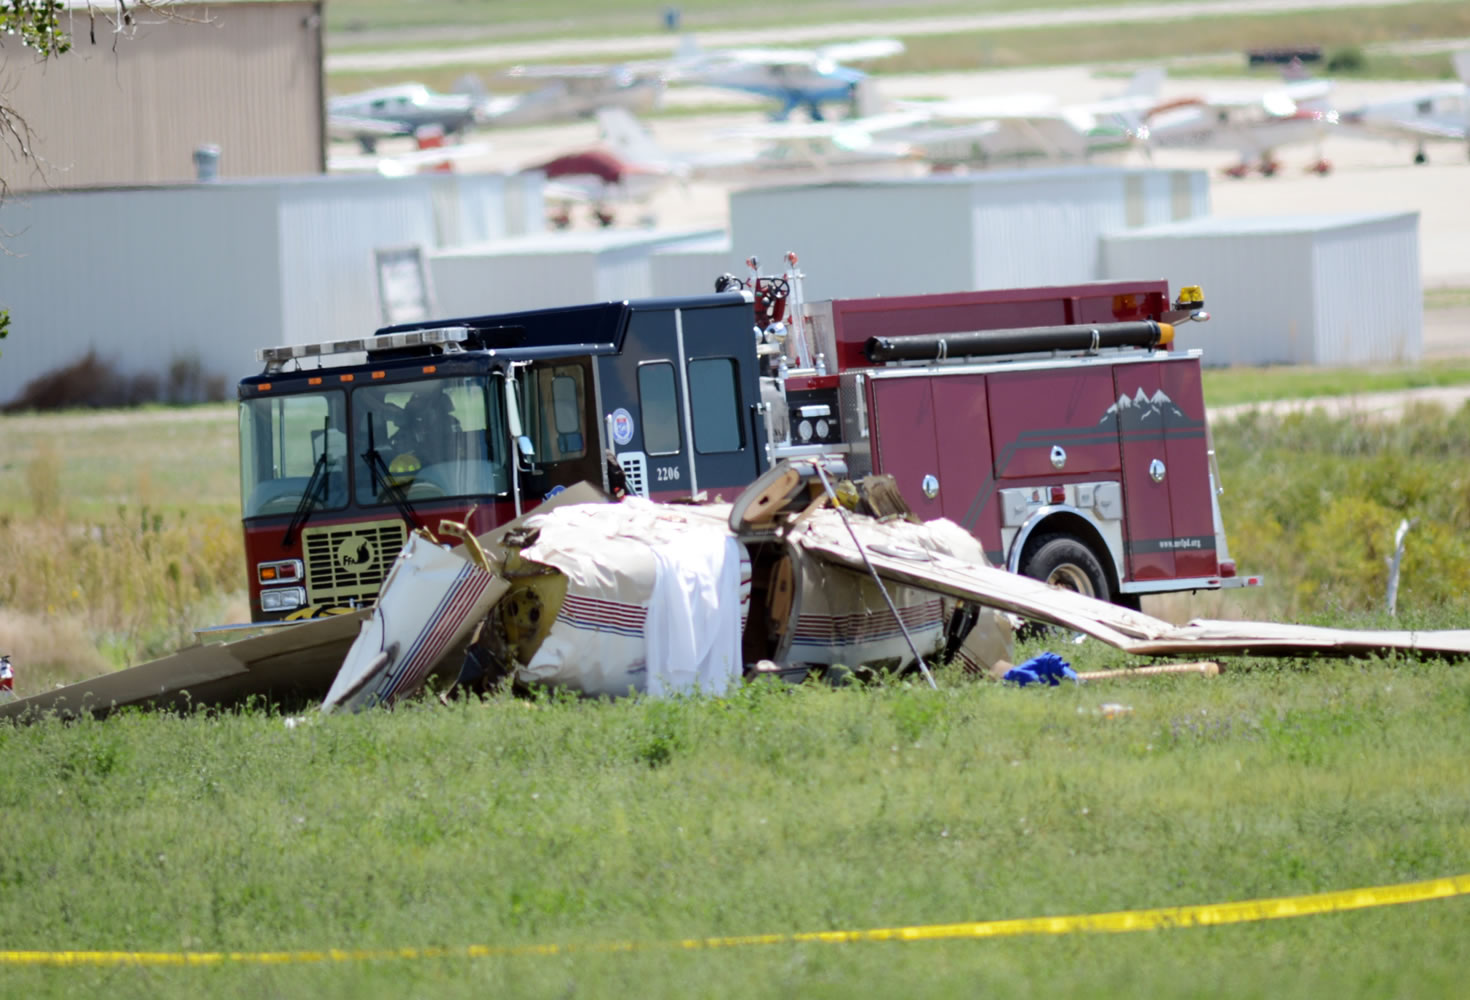 Firefighters work on the scene where three people were killed and two others injured after an airplane crashed in a field northwest of the main runway at Erie Municipal Airport while coming in for a landing in Erie, Colo., on Sunday.